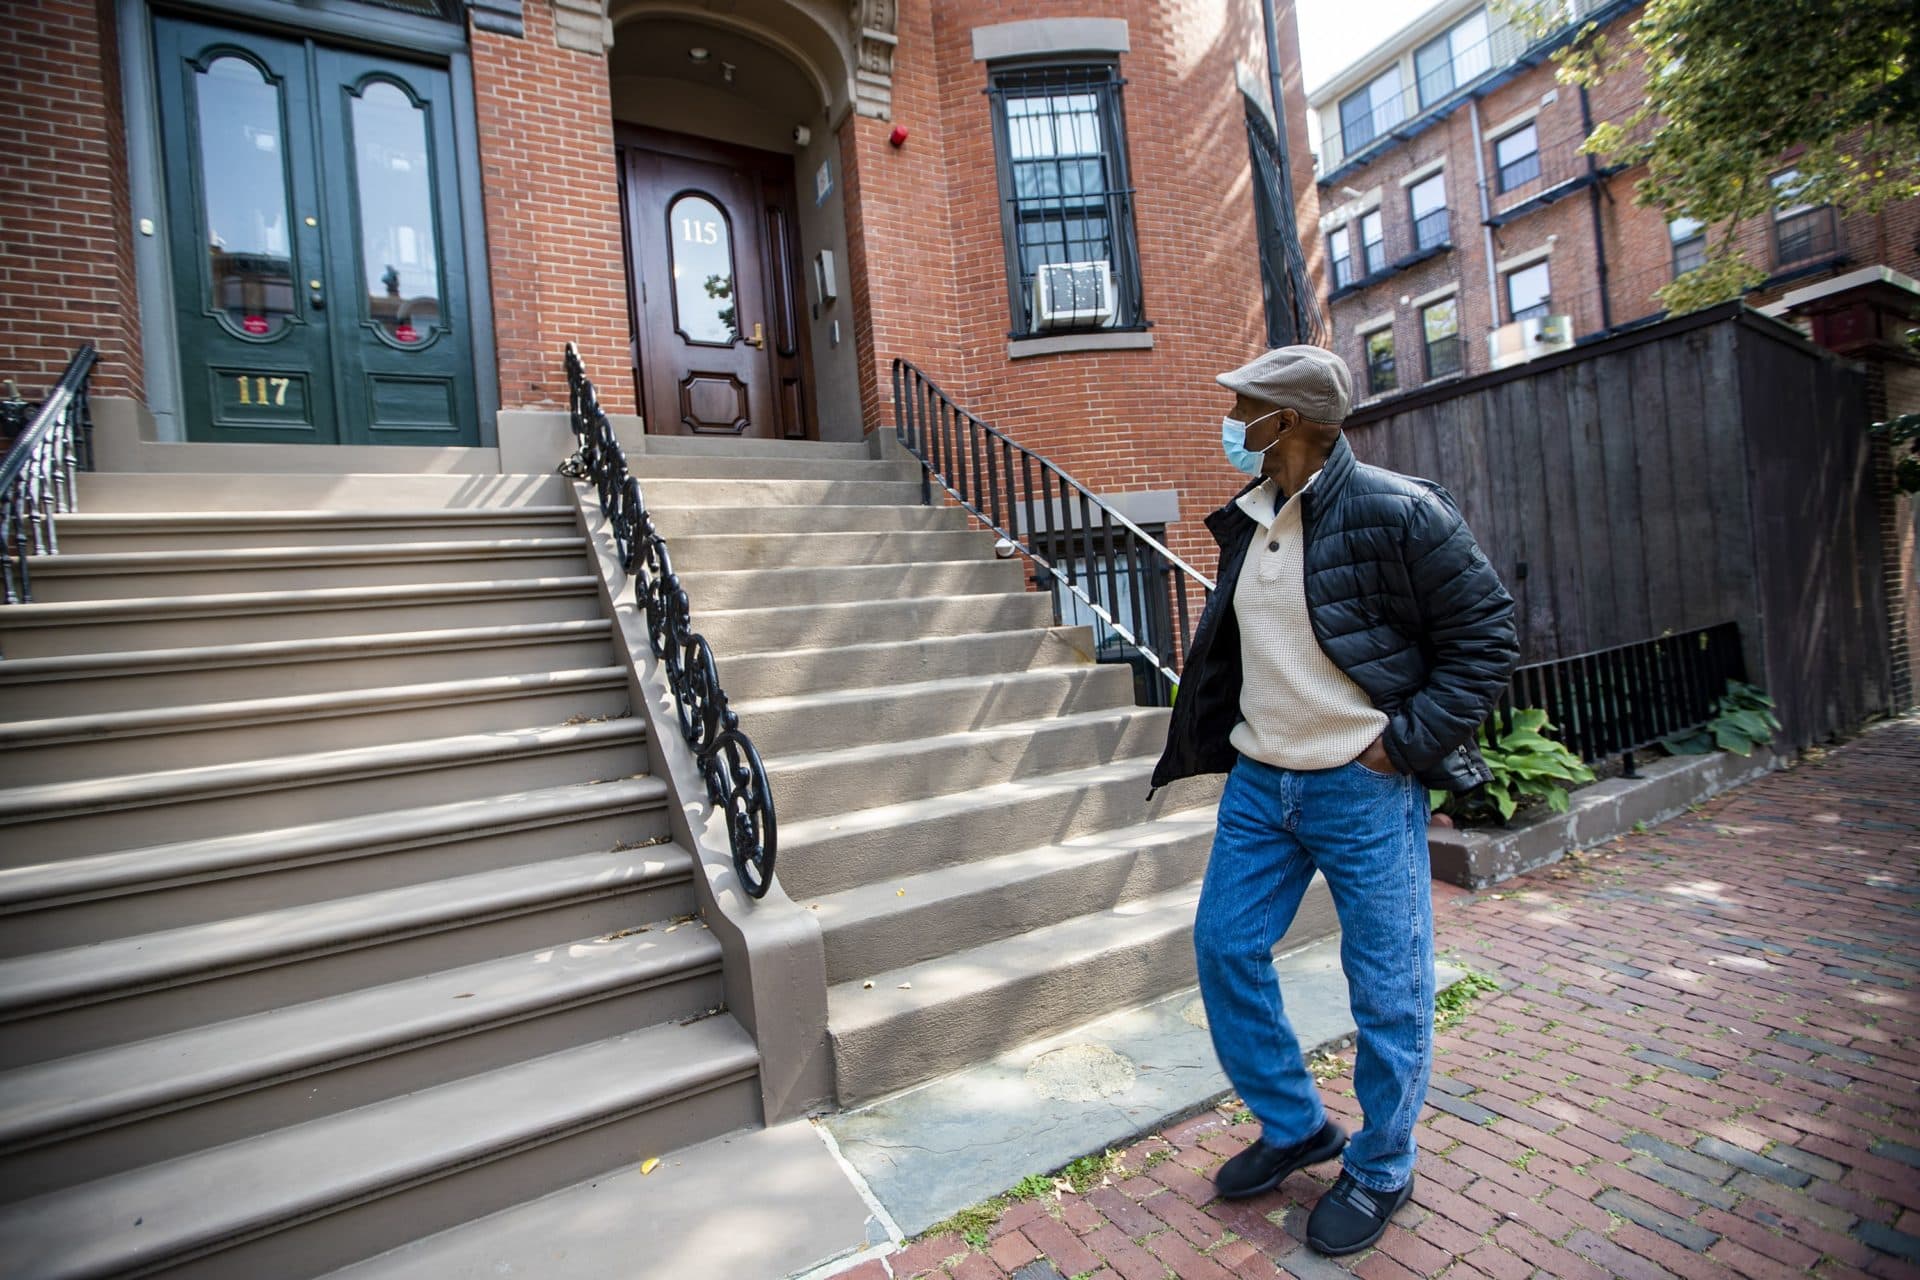 Charles Clark, of the Tenants’ Development Corporation, walks past 115 West Newton St. in the South End, one of the affordable housing properties managed by the corporation. (Jesse Costa/WBUR)